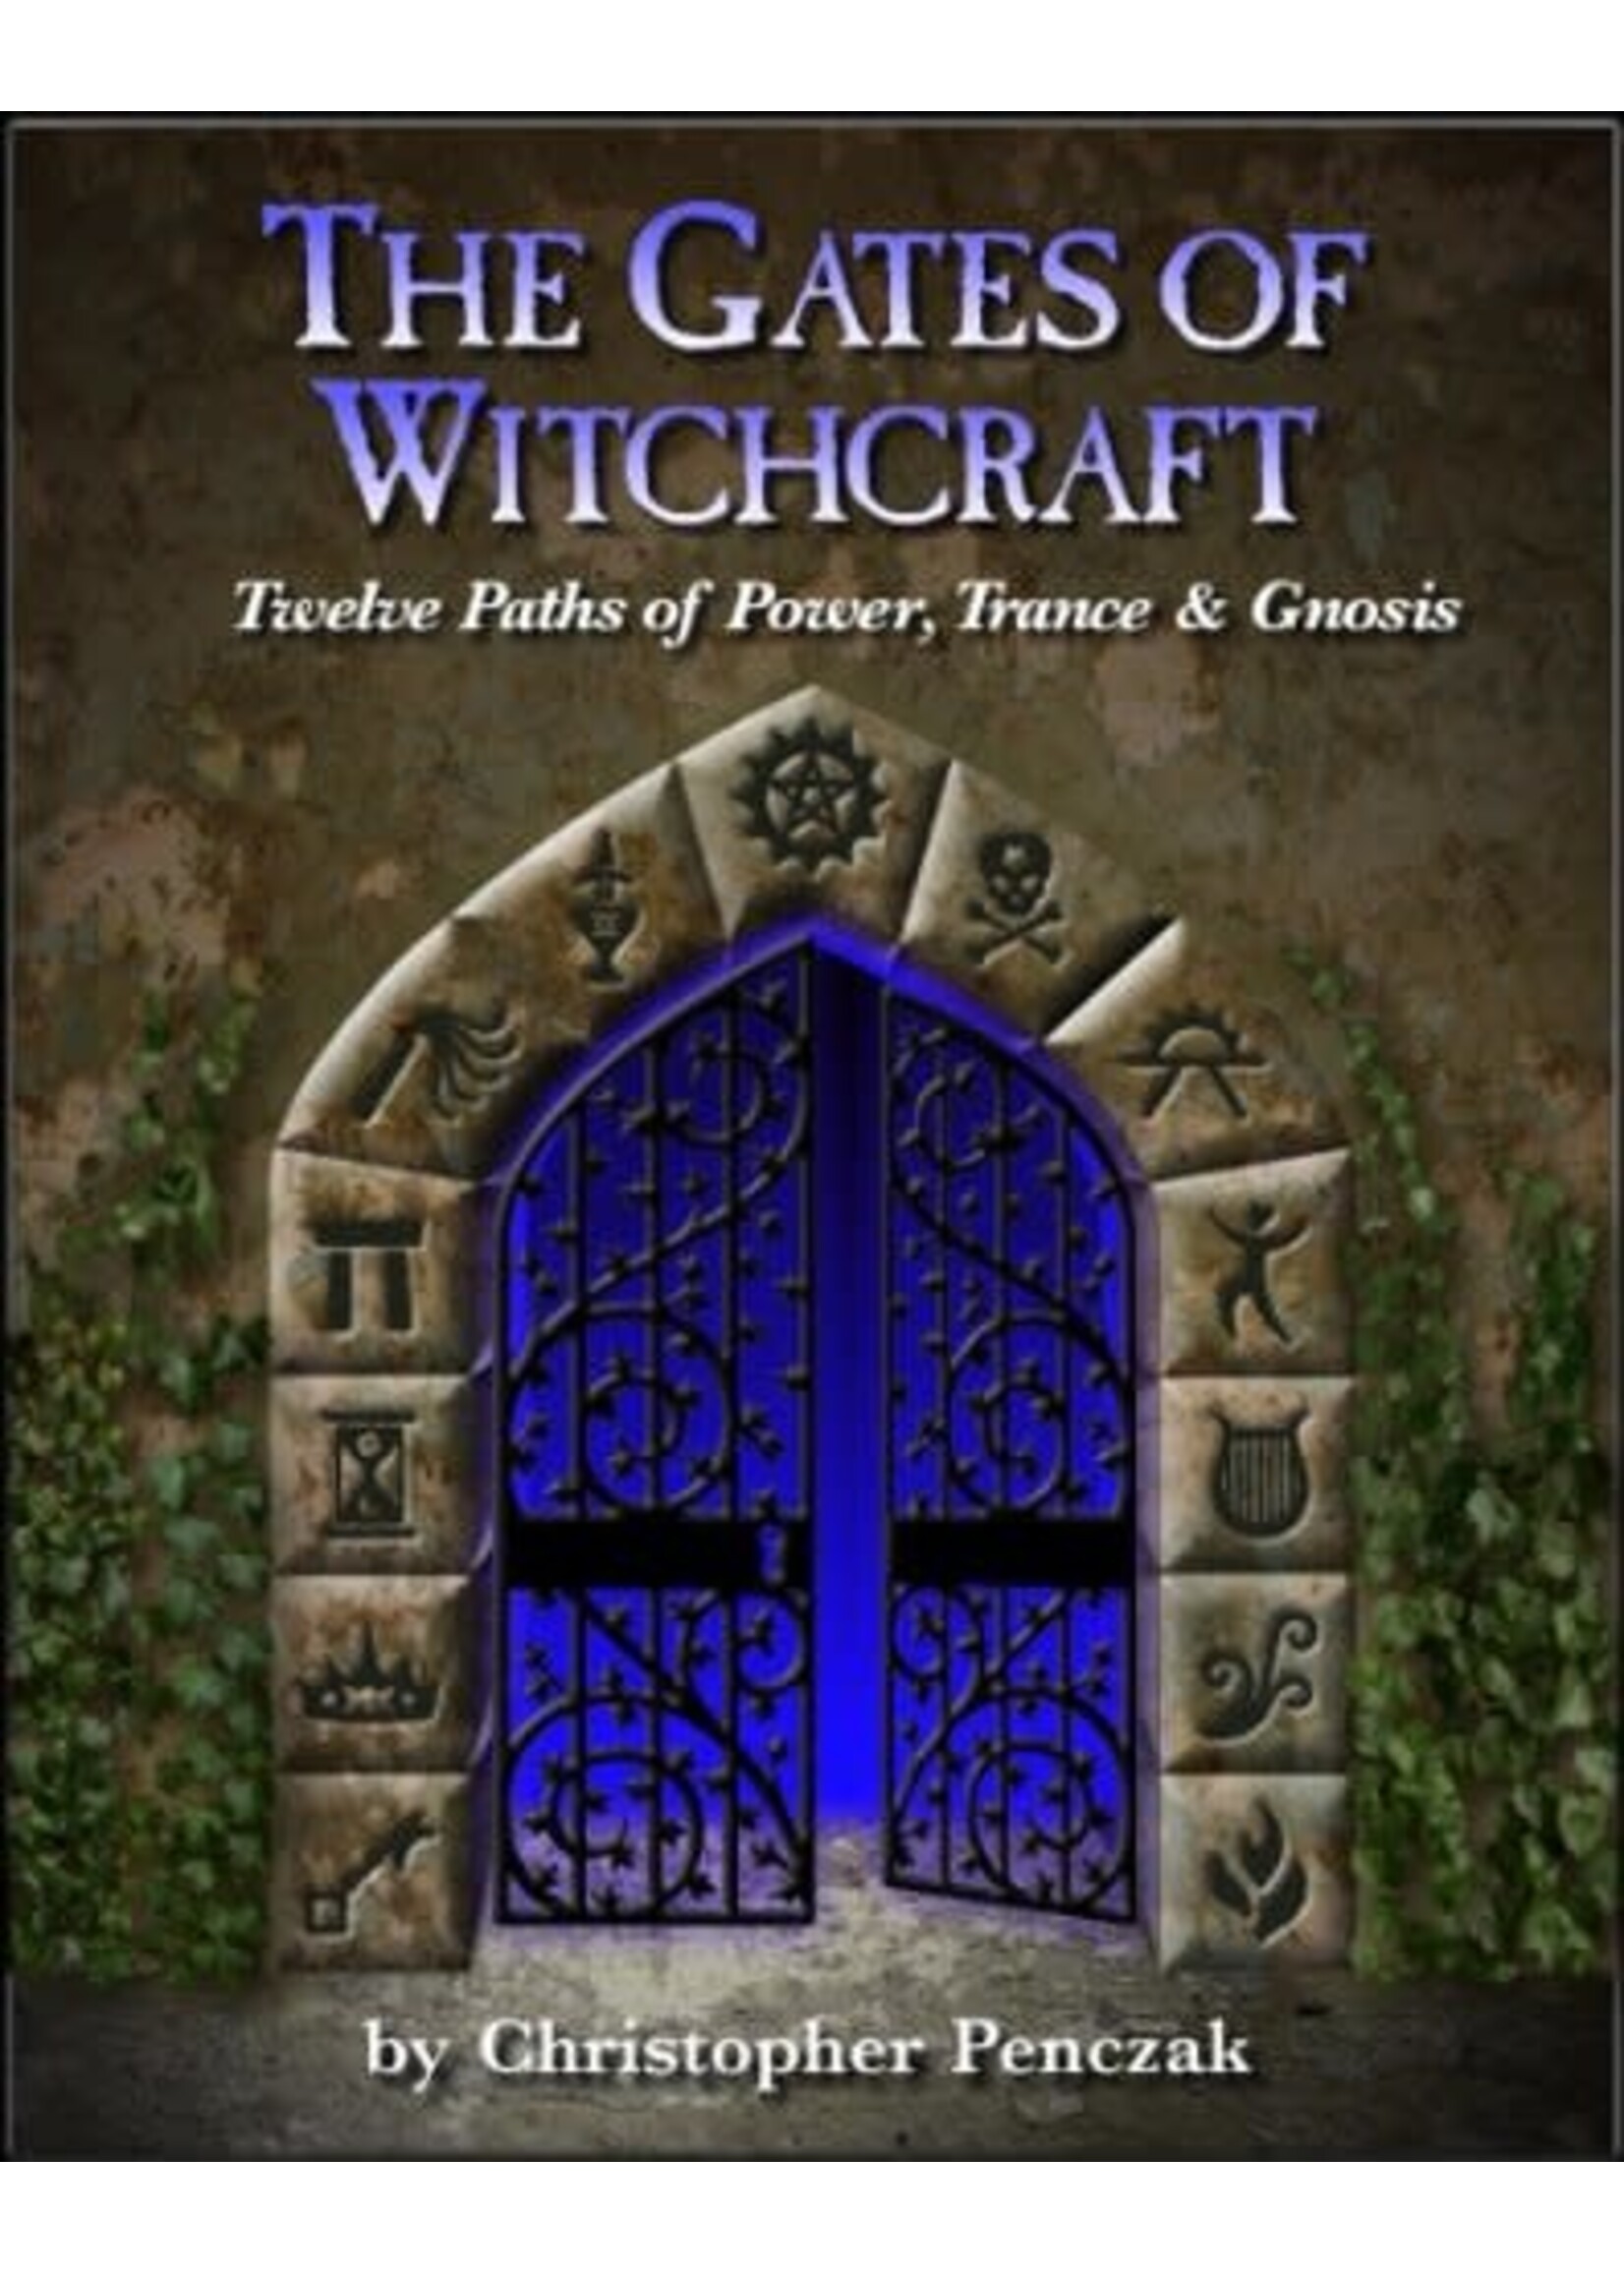 The Gates of Witchcraft by Christopher Penczak